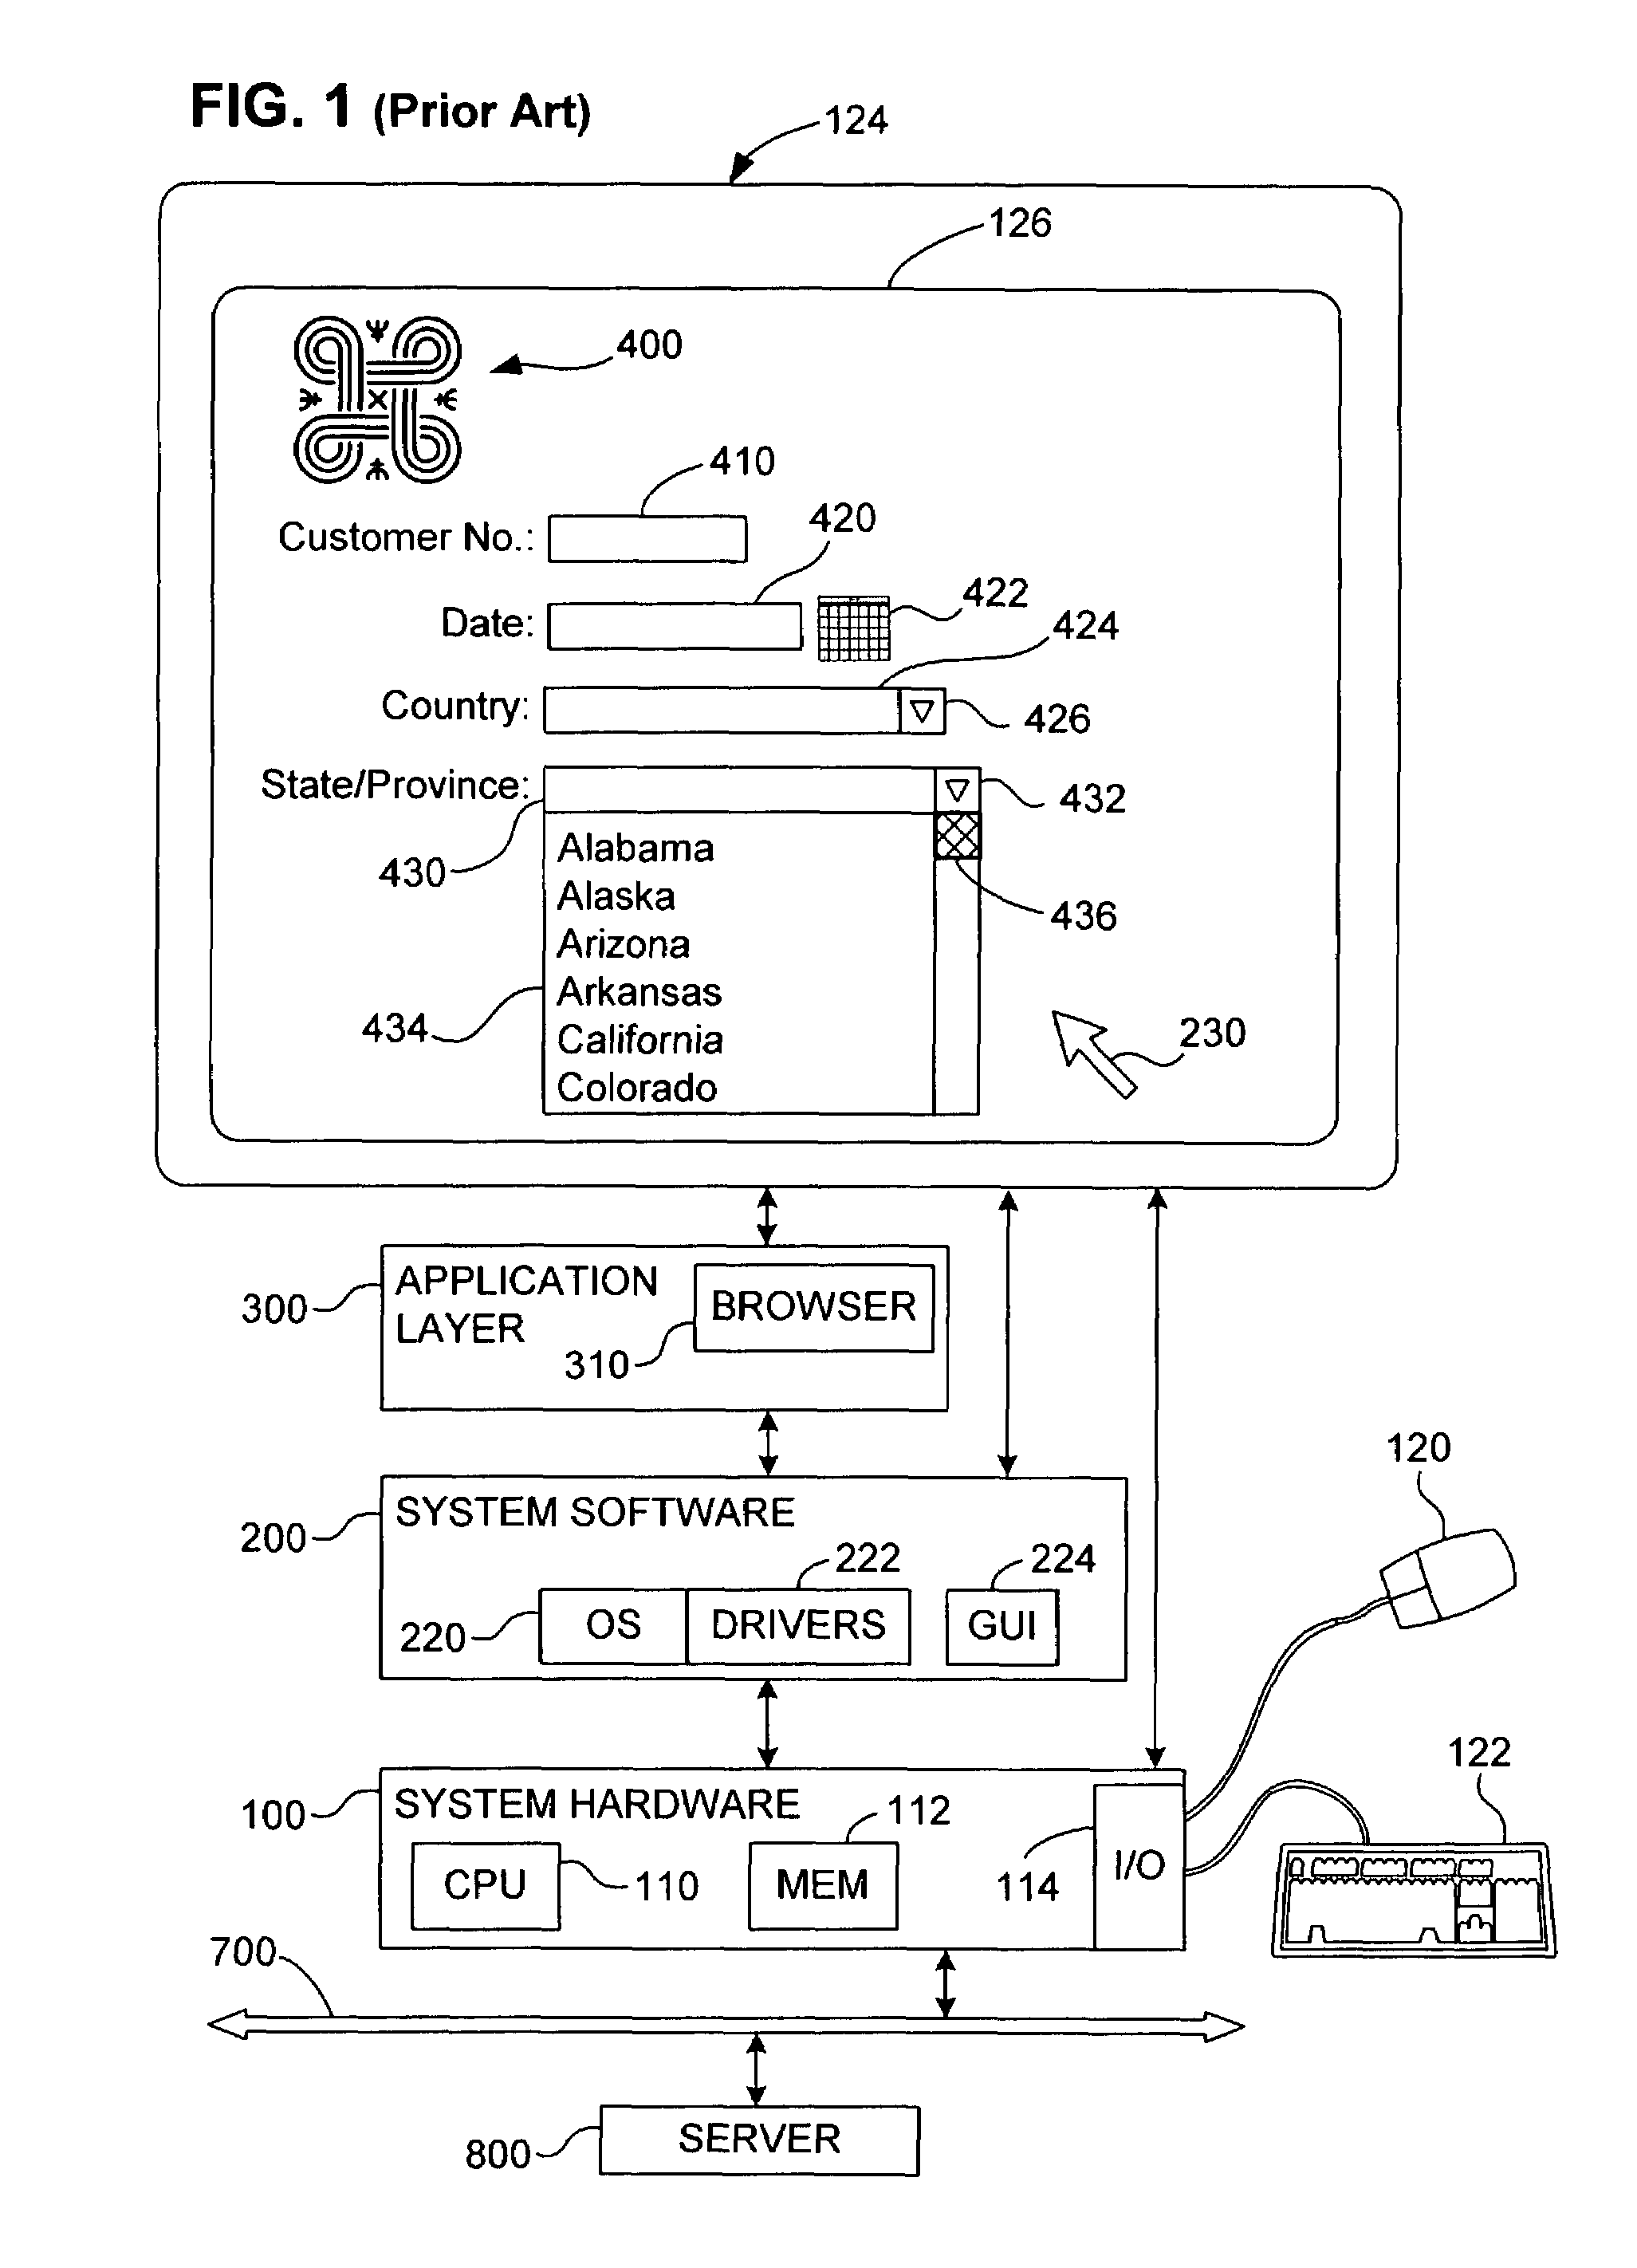 Graphical device for comprehensive viewing and input of variable data via a browser-based display